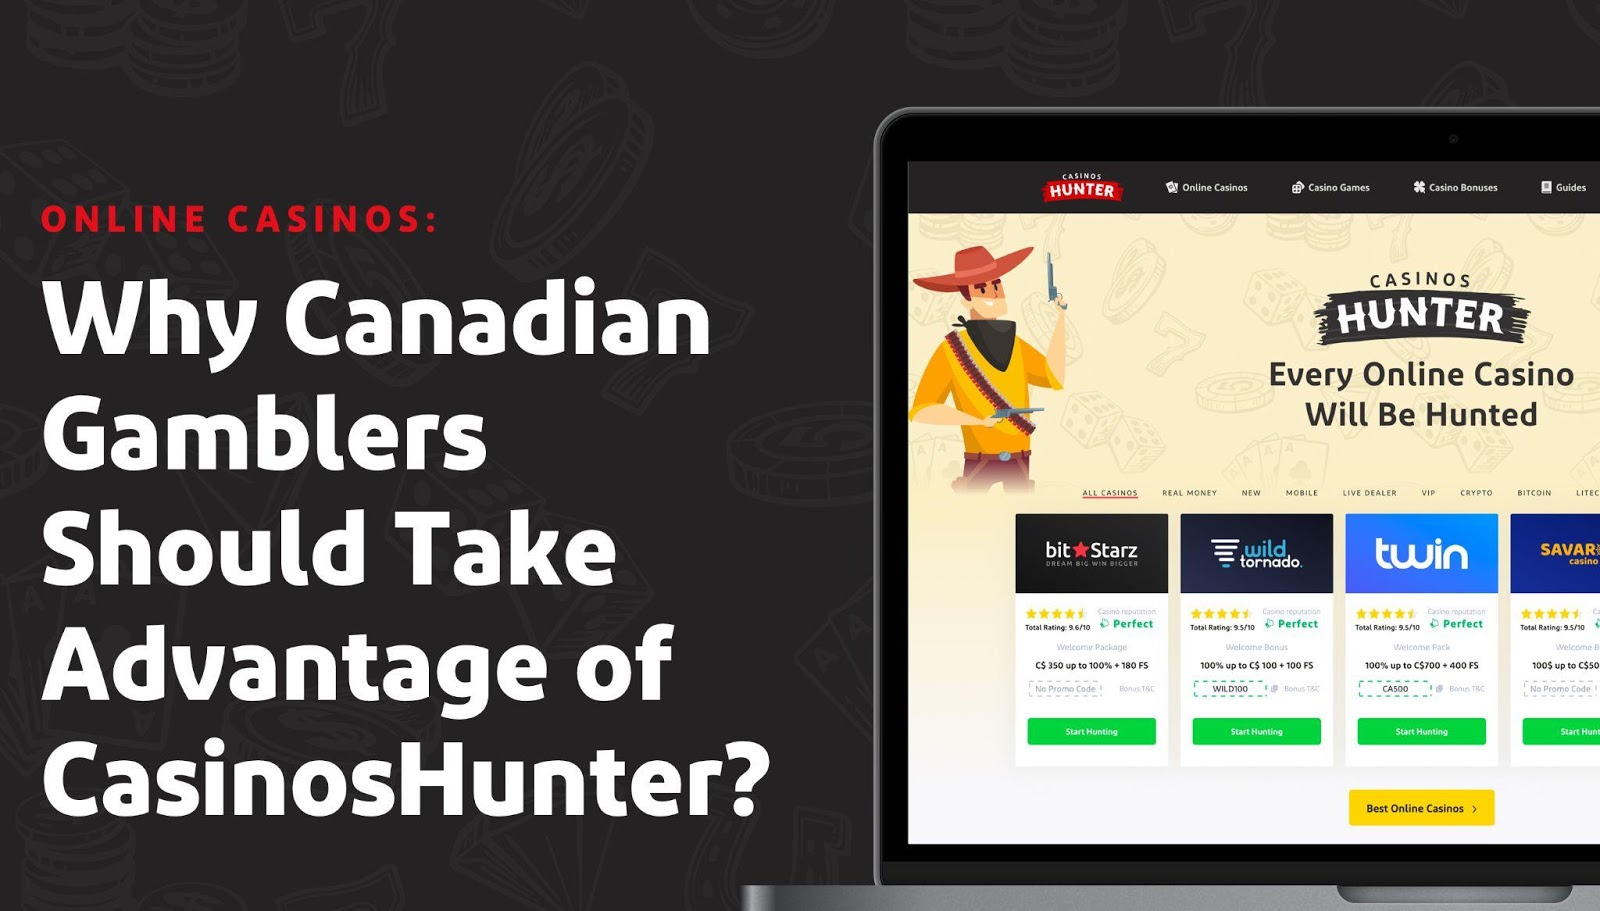 Now You Can Have Your best online casino in canada Done Safely